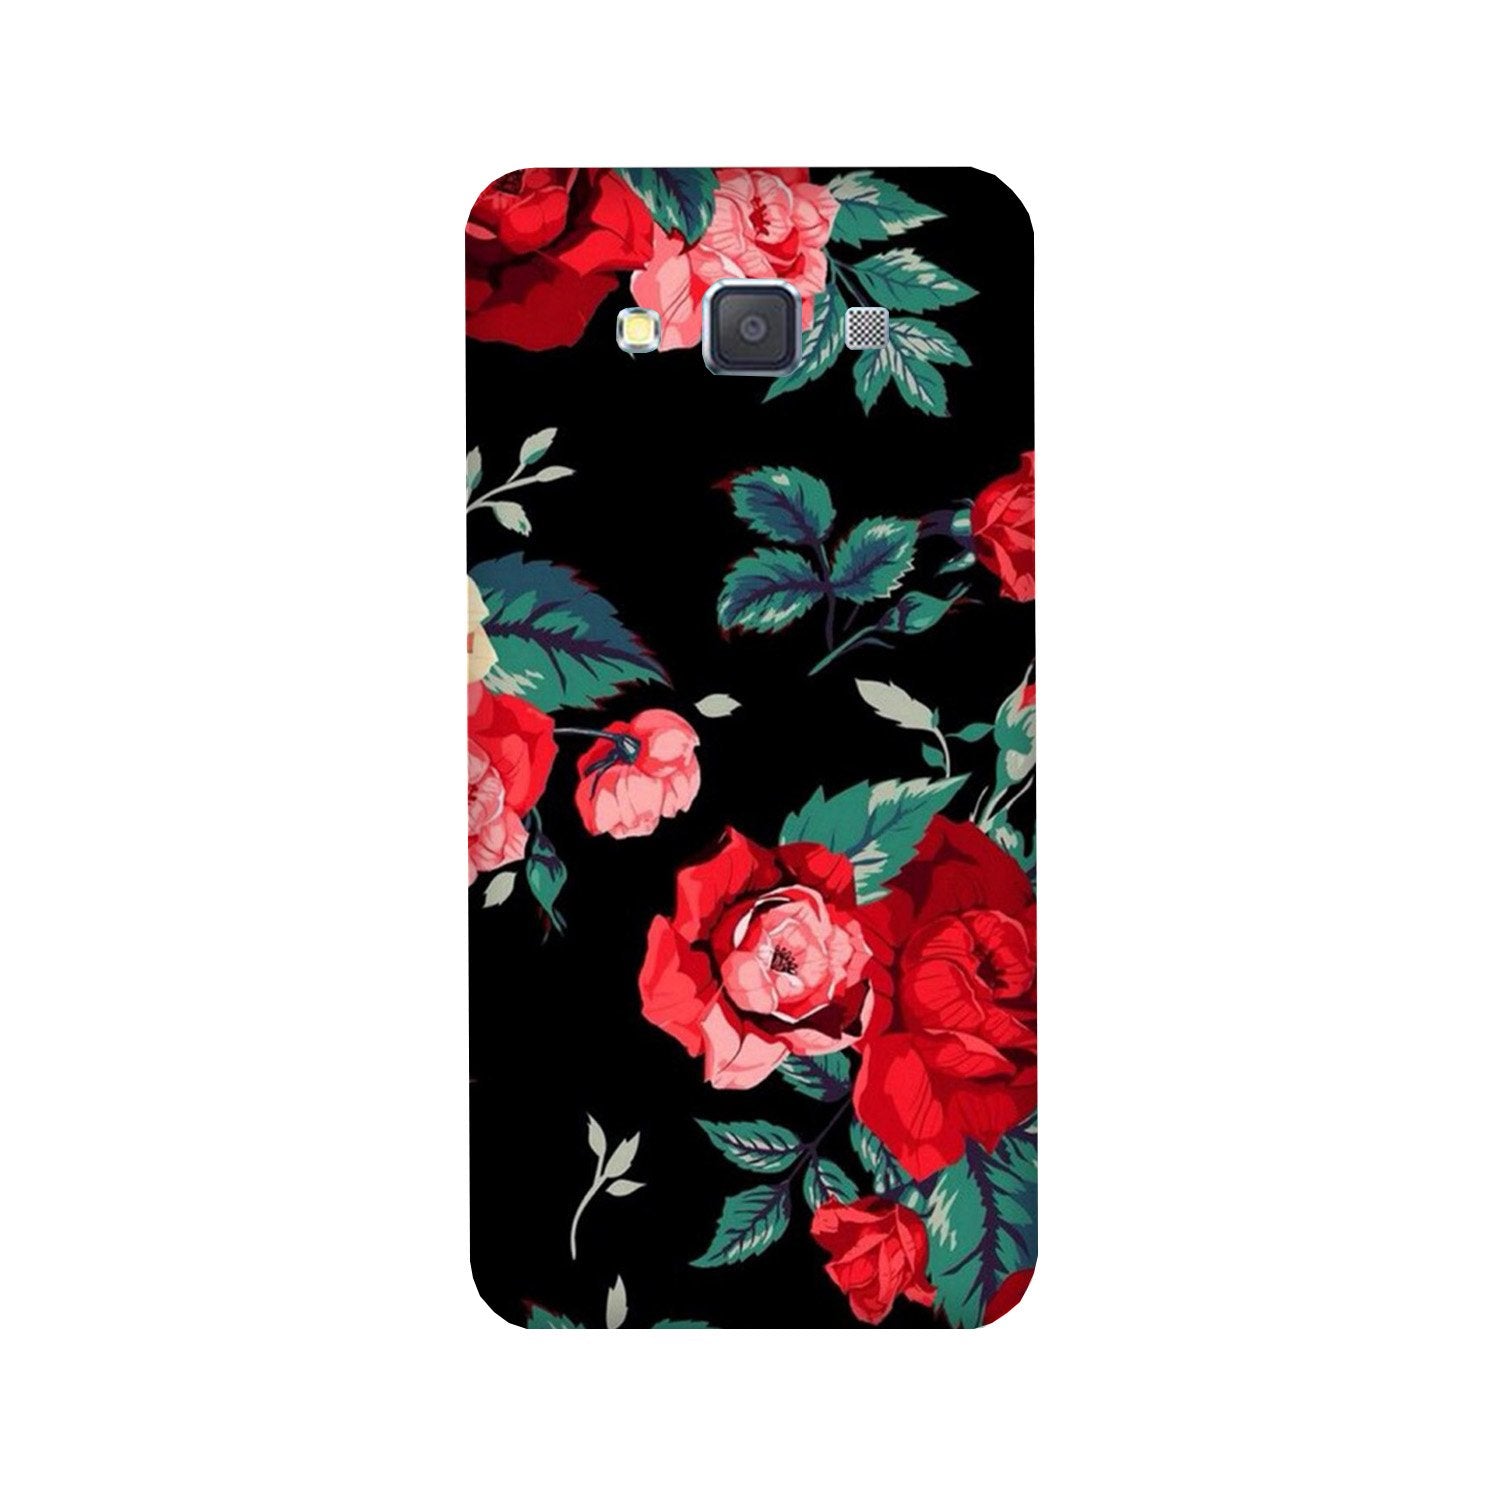 Red Rose2 Case for Galaxy Grand Prime